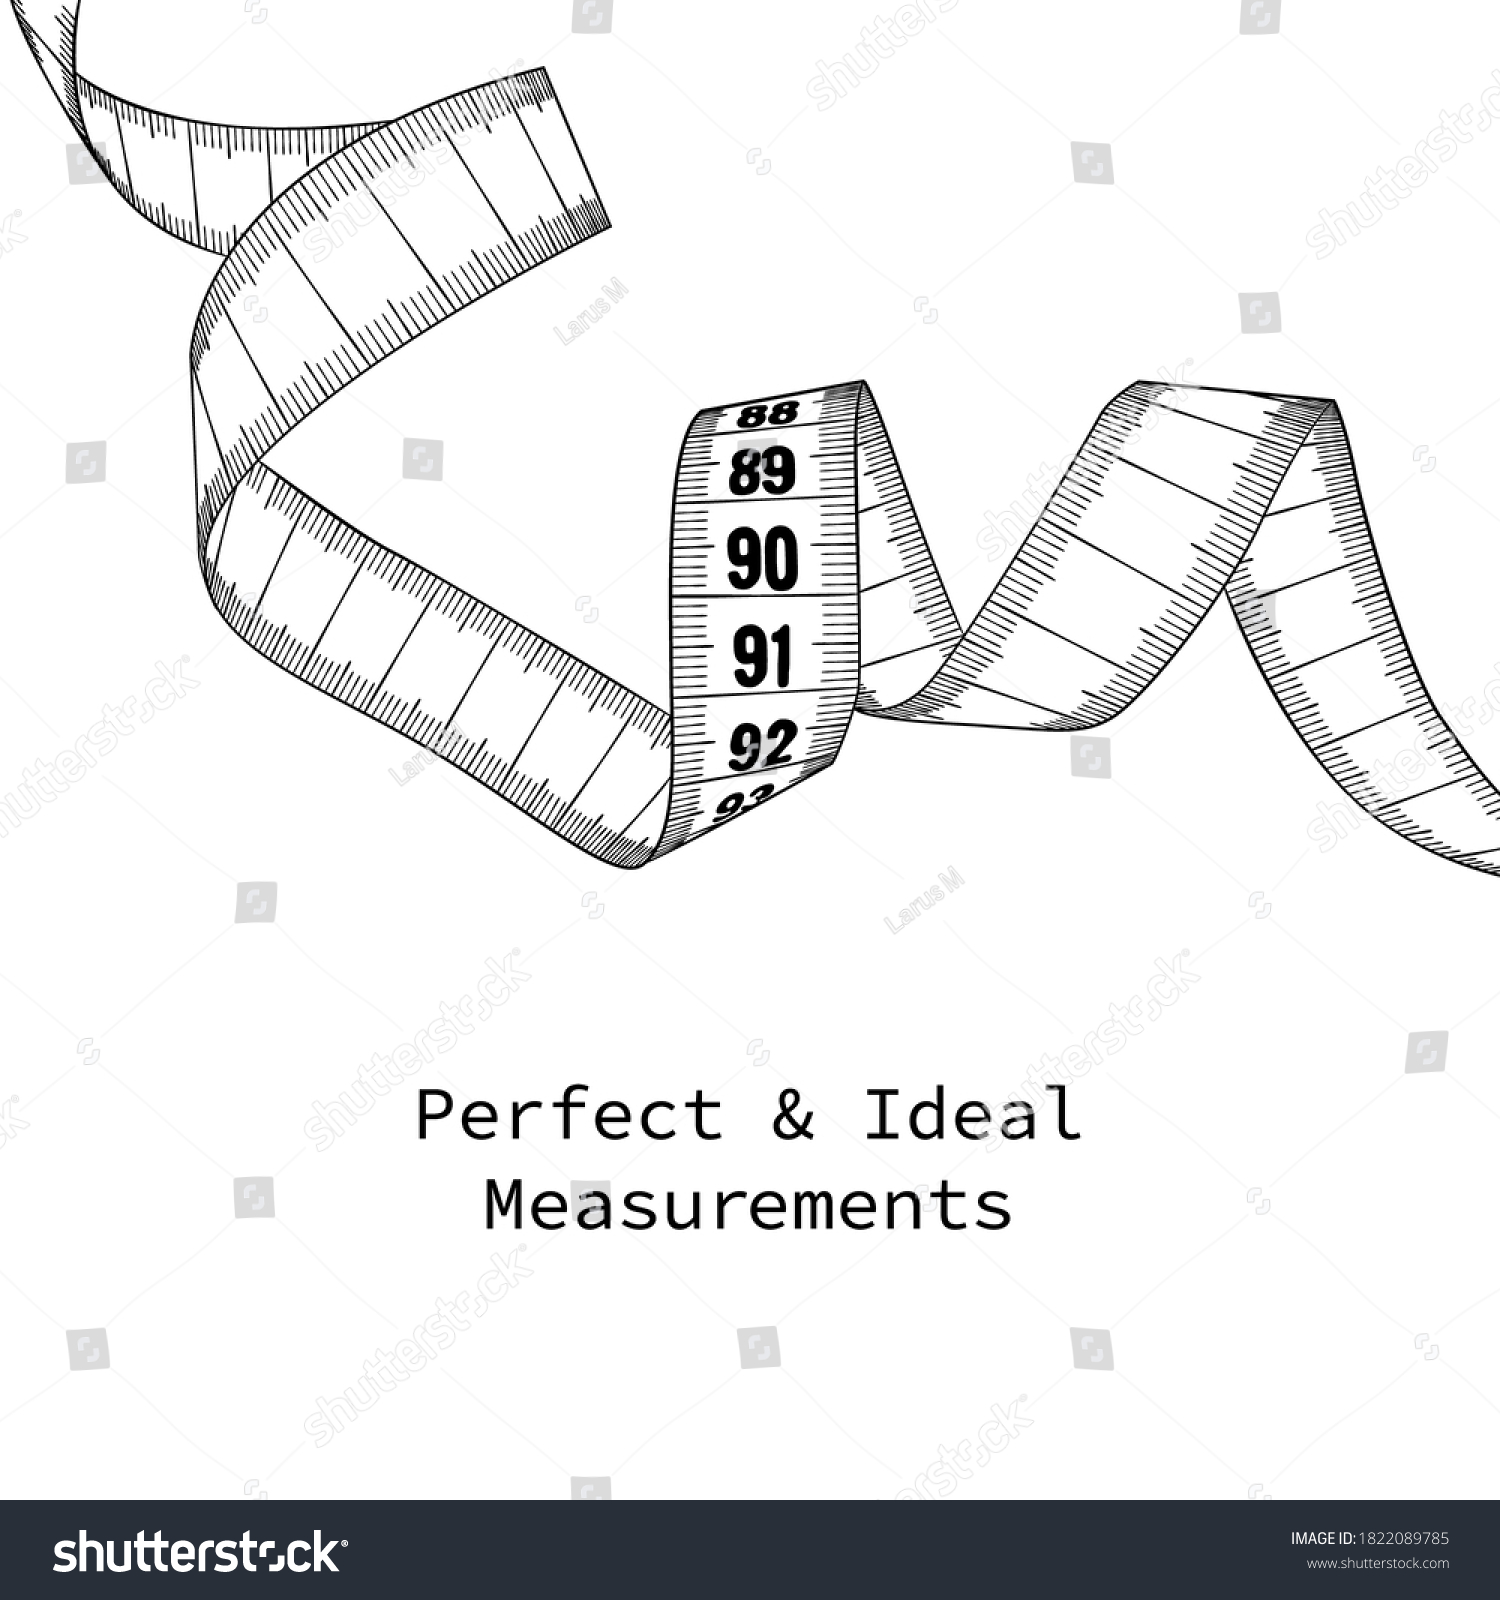 Measuring tape - concept illustration for body ideals. Easy to replace numbers with your own. B&W decorative design element. #1822089785